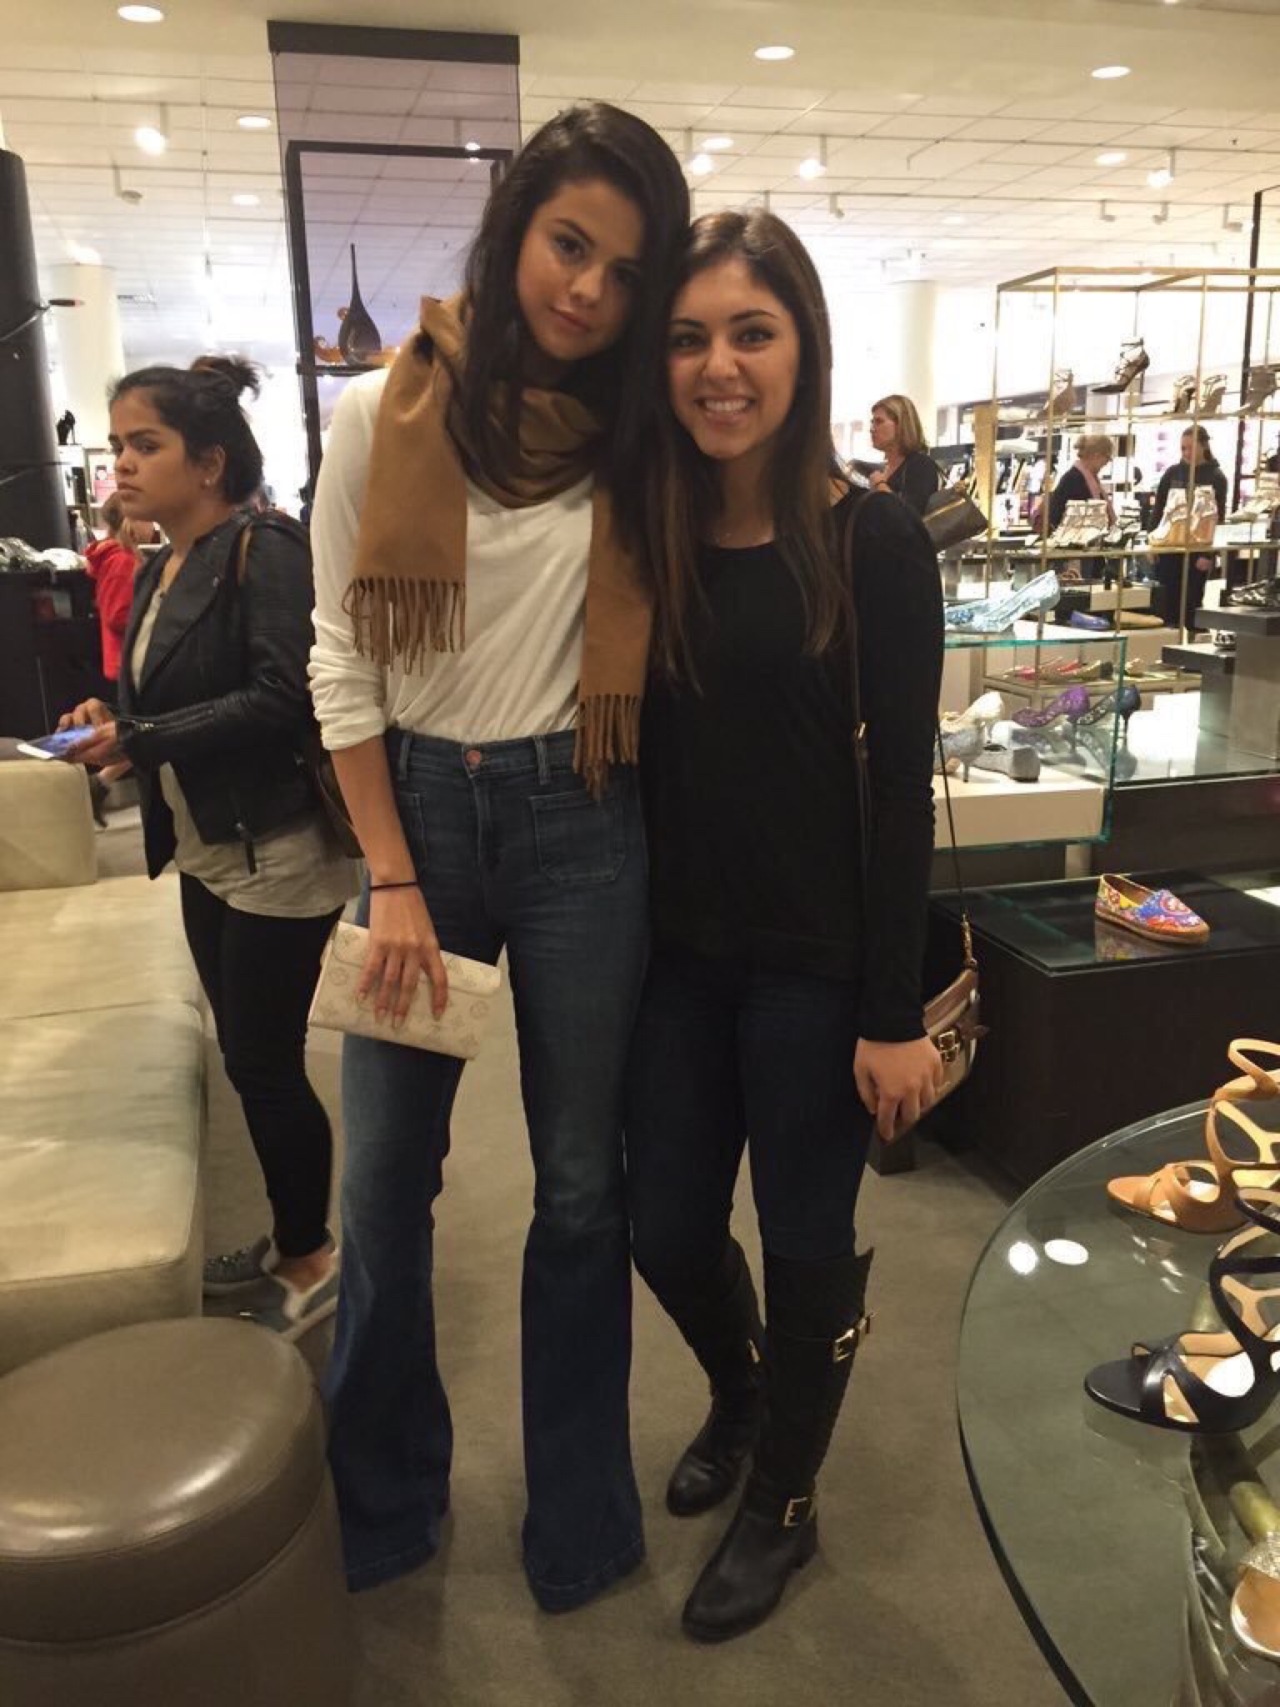 January 8: Selena with a fan at NorthPark Center in Dallas, TX